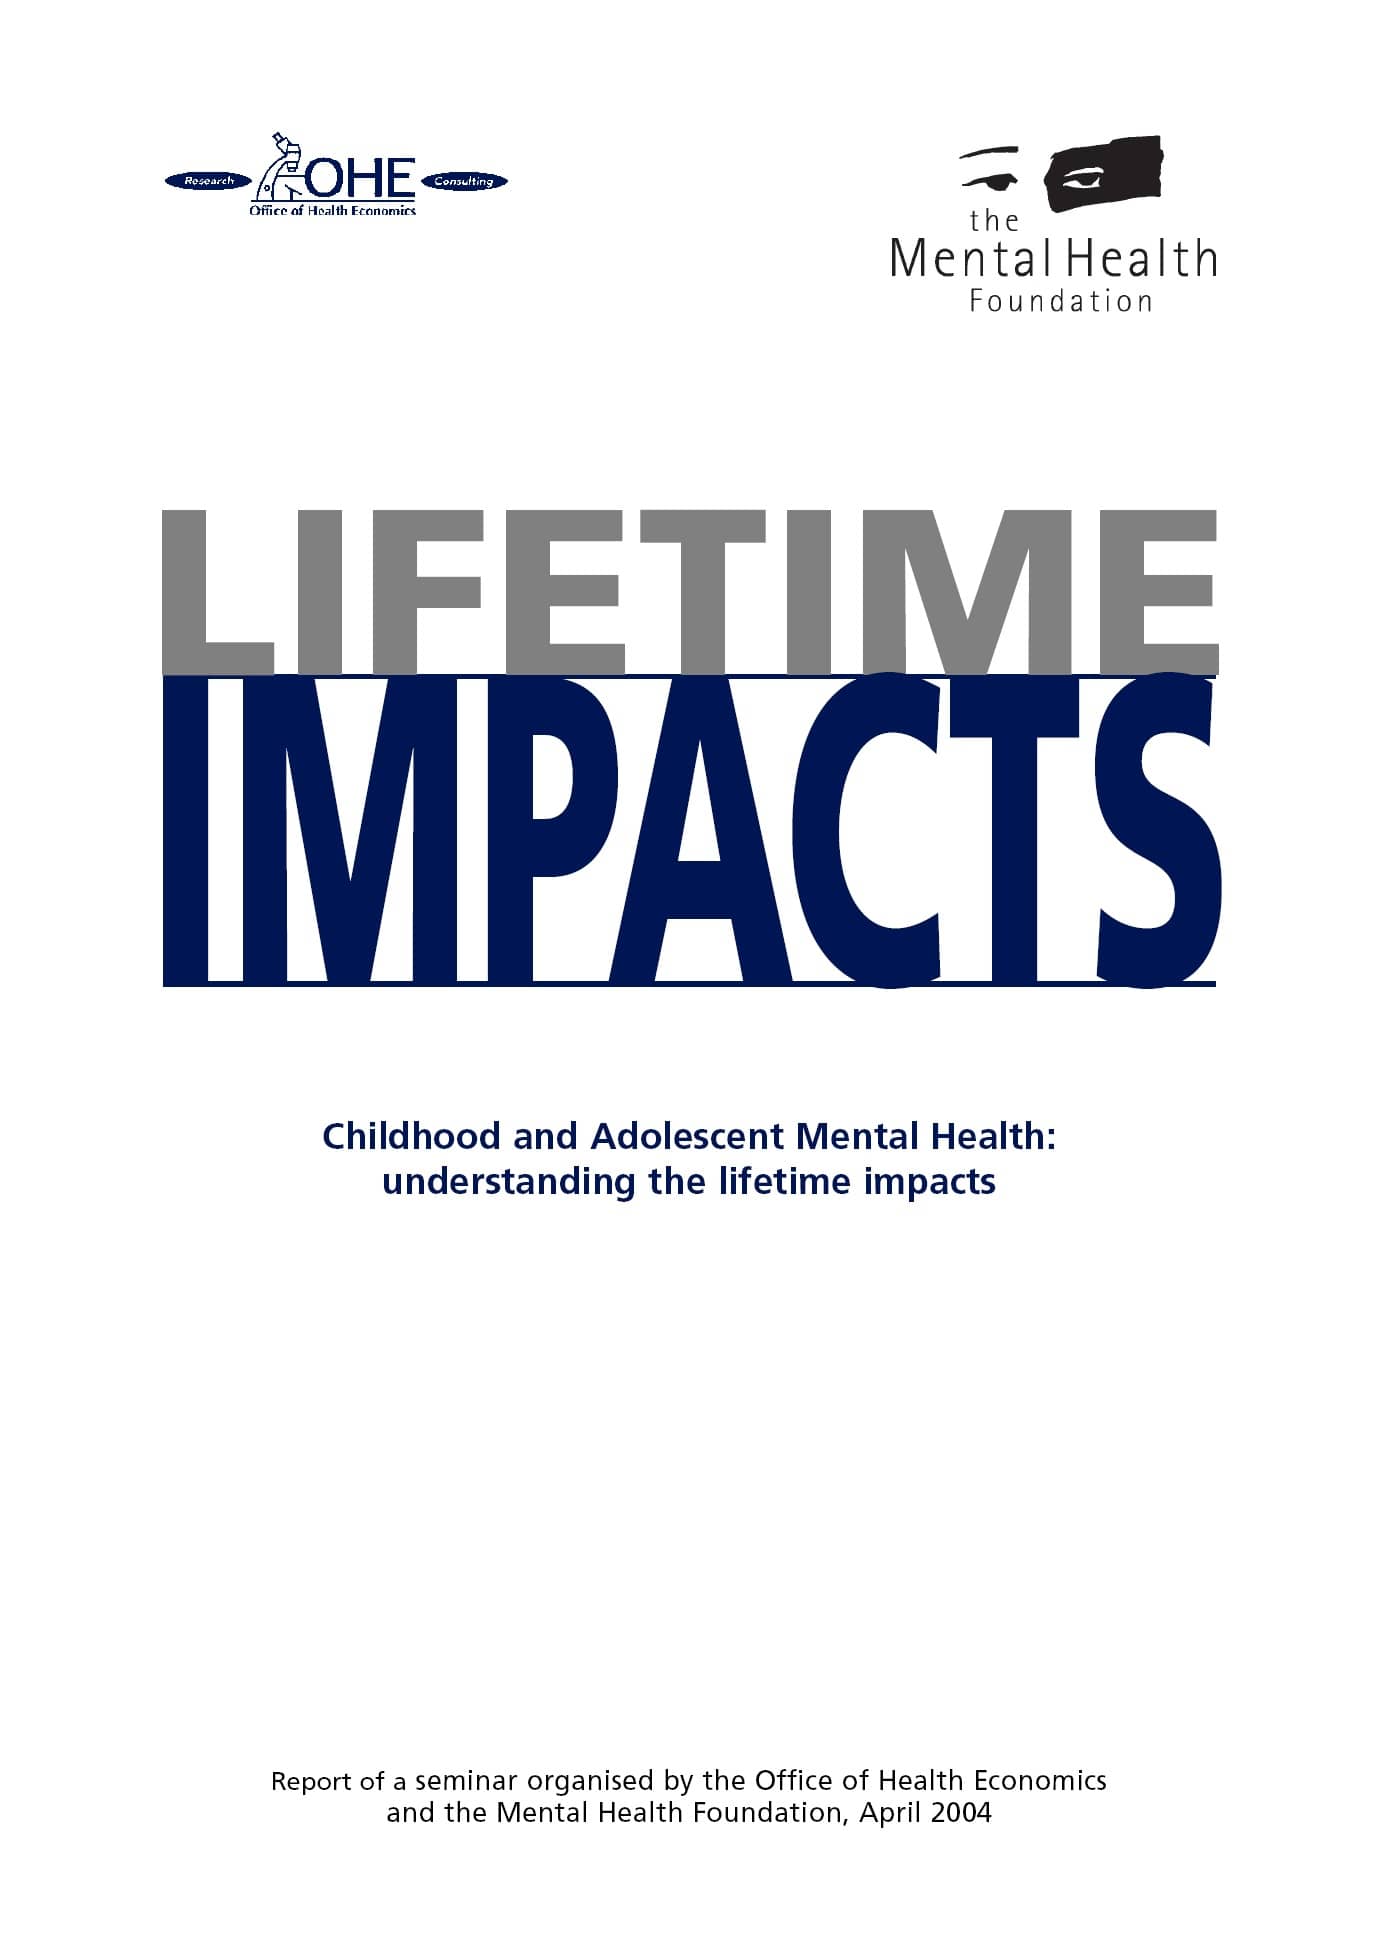 Childhood and Adolescent Mental Health: Understanding the Lifetime Impacts